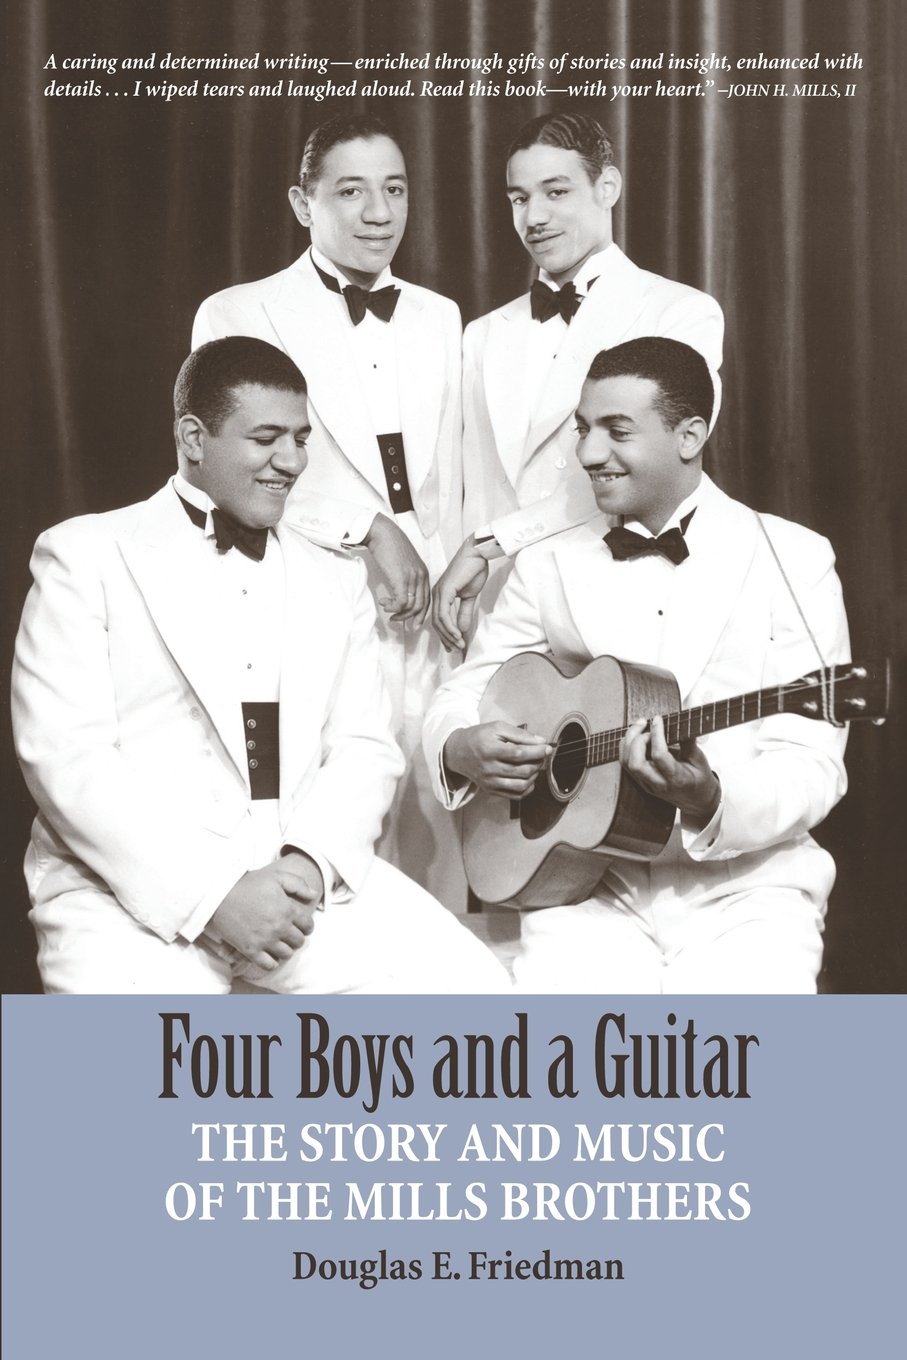 Four Boys and a Guitar: The Story and Music of the Mills Brothers